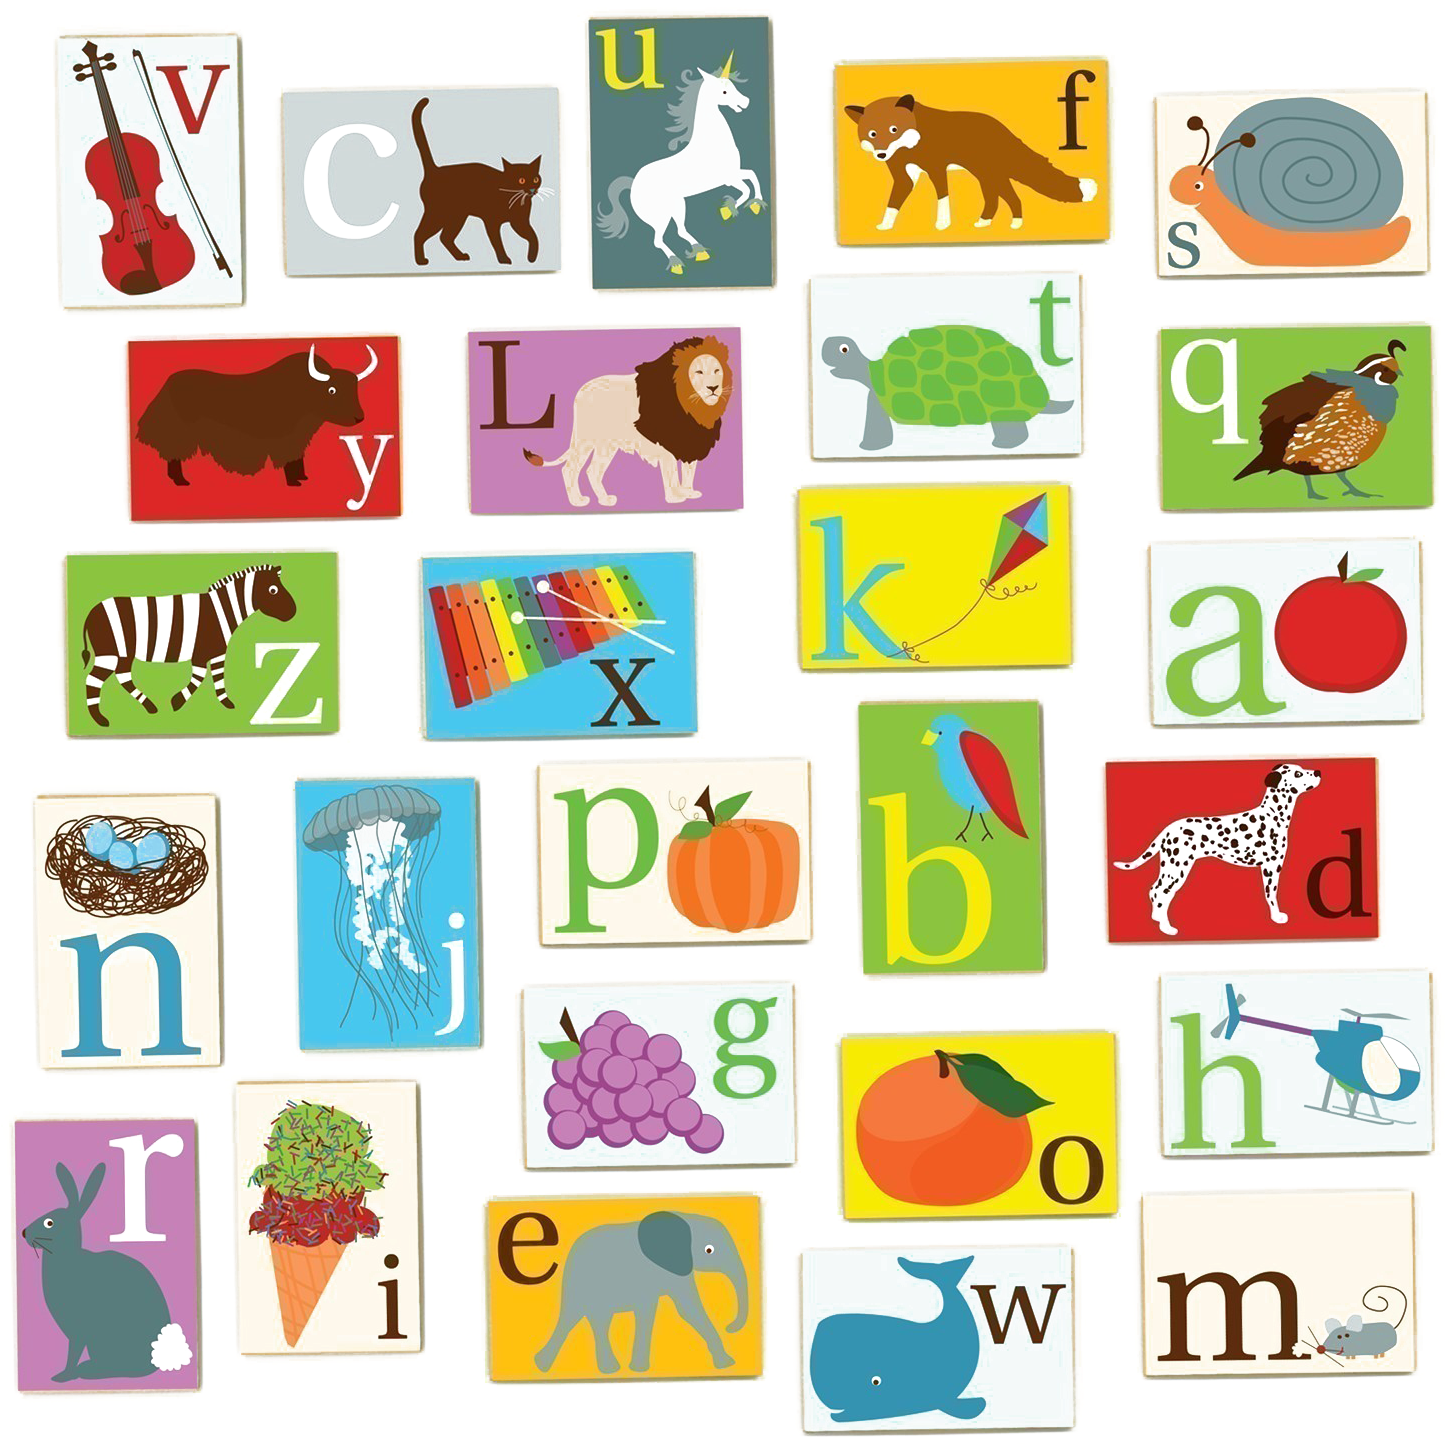 A To Z Alphabet Free Download Image PNG Image